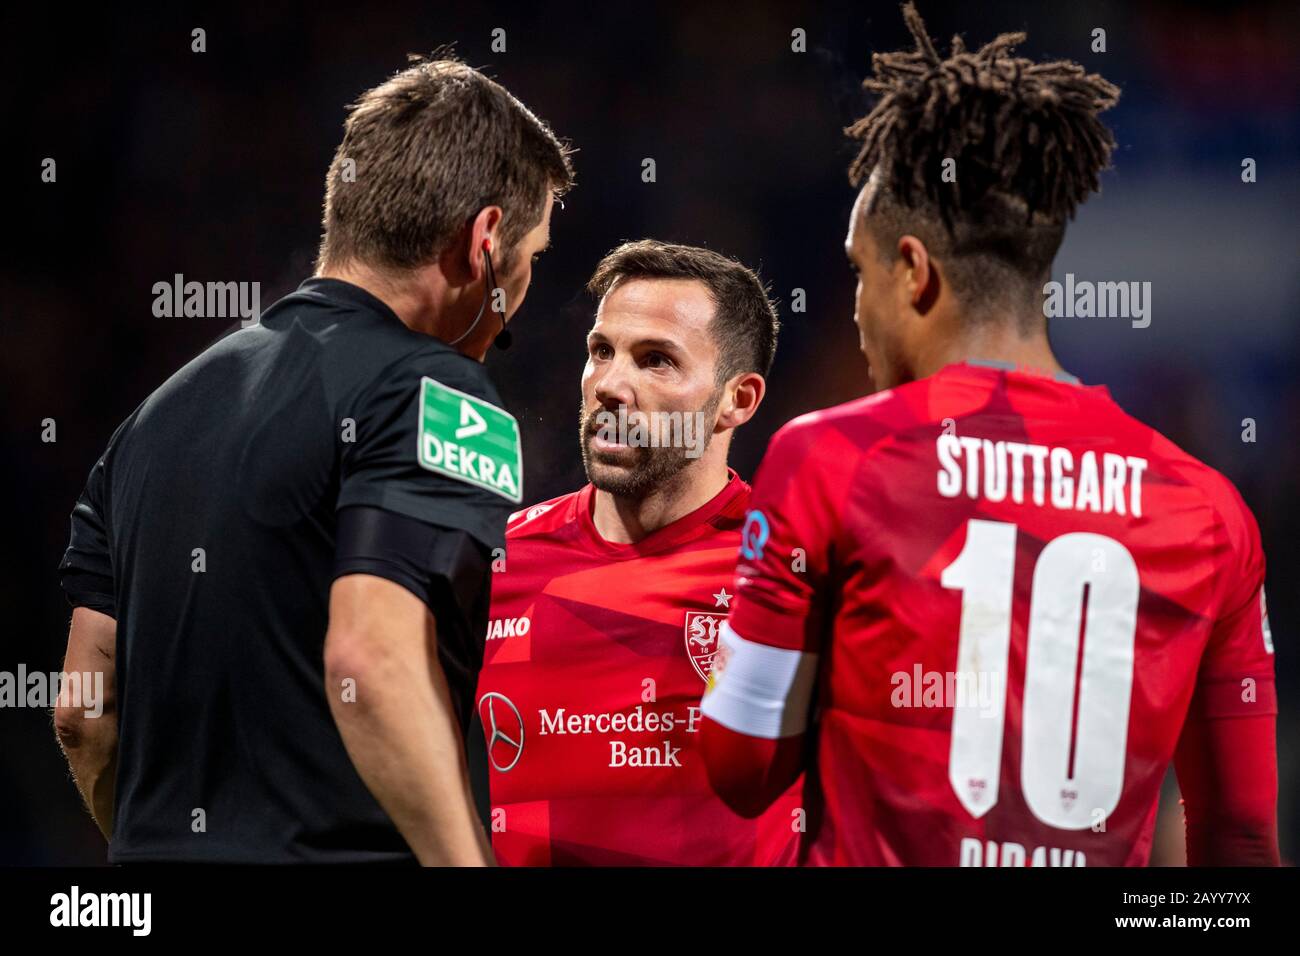 Bochum, Germany. 17th Feb, 2020. Football: 2nd Bundesliga, VfL Bochum - VfB Stuttgart, 22nd matchday, at the Vonovia Ruhr Stadium. Referee Frank Willenborg (l-r) talks to Stuttgart's Gonzalo Castro and Daniel Didavi. Credit: David Inderlied/dpa - IMPORTANT NOTE: In accordance with the regulations of the DFL Deutsche Fußball Liga and the DFB Deutscher Fußball-Bund, it is prohibited to exploit or have exploited in the stadium and/or from the game taken photographs in the form of sequence images and/or video-like photo series./dpa/Alamy Live News Stock Photo